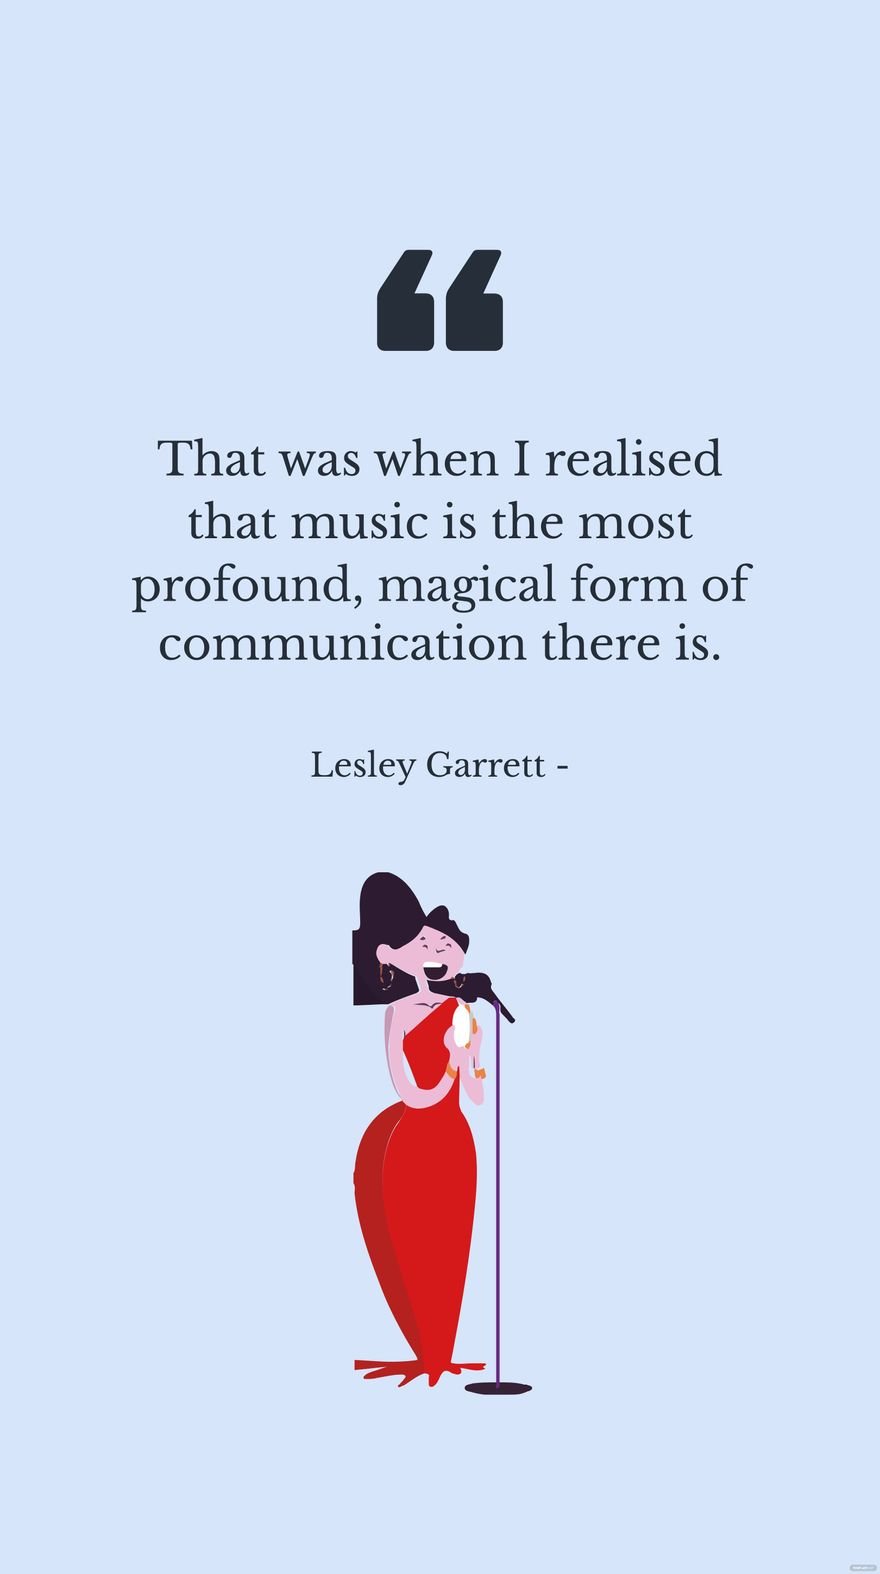 Free Lesley Garrett - That was when I realised that music is the most profound, magical form of communication there is. in JPG